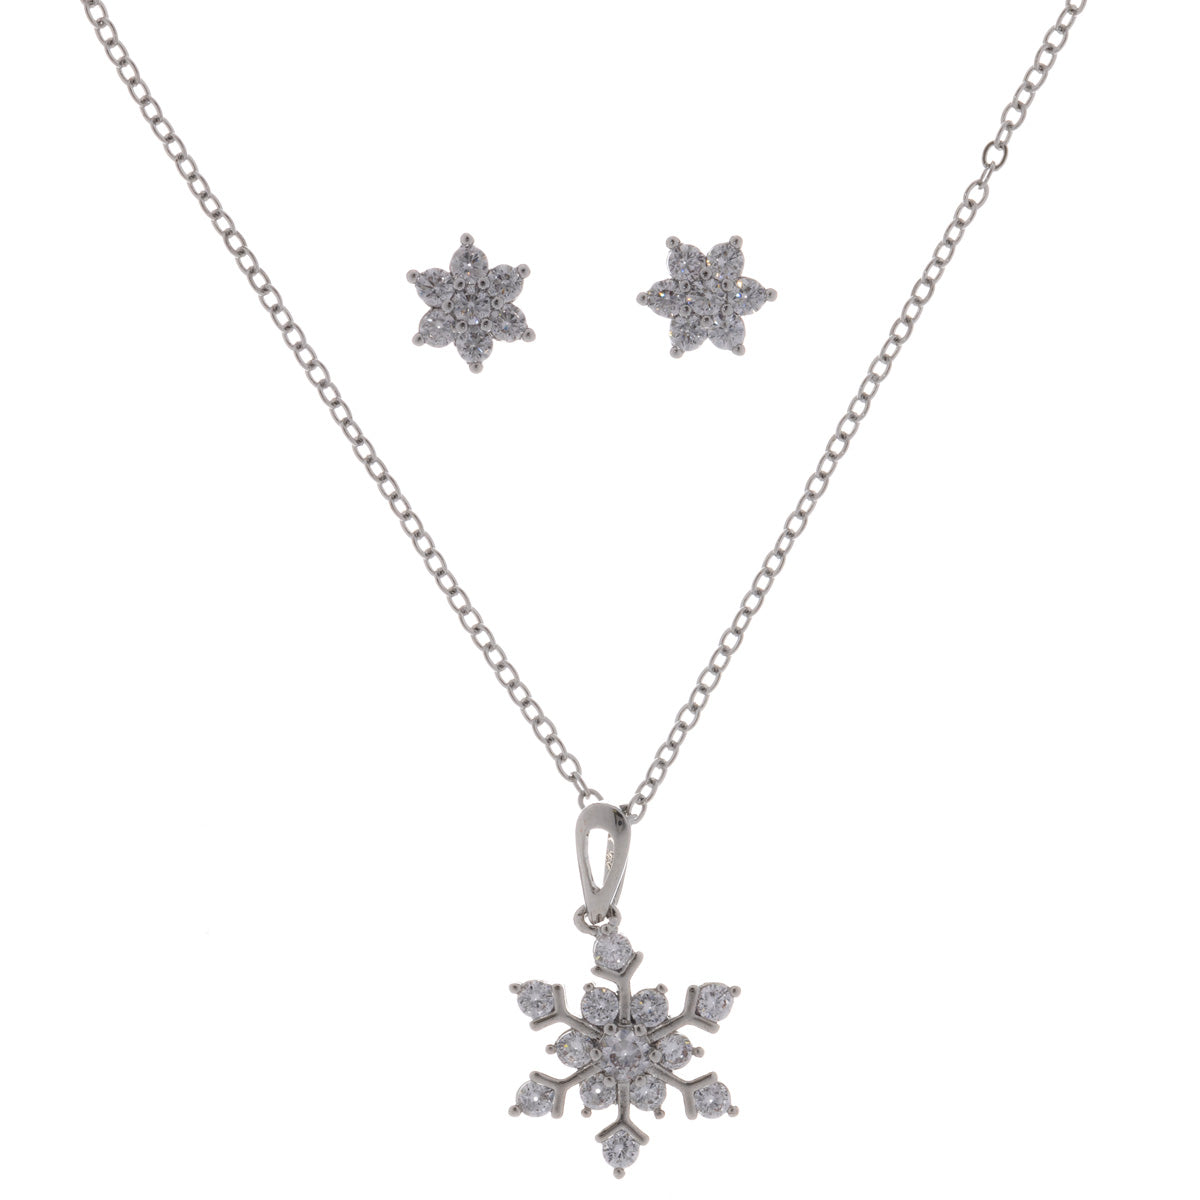 Snowflake necklace and earrings set in a gift box